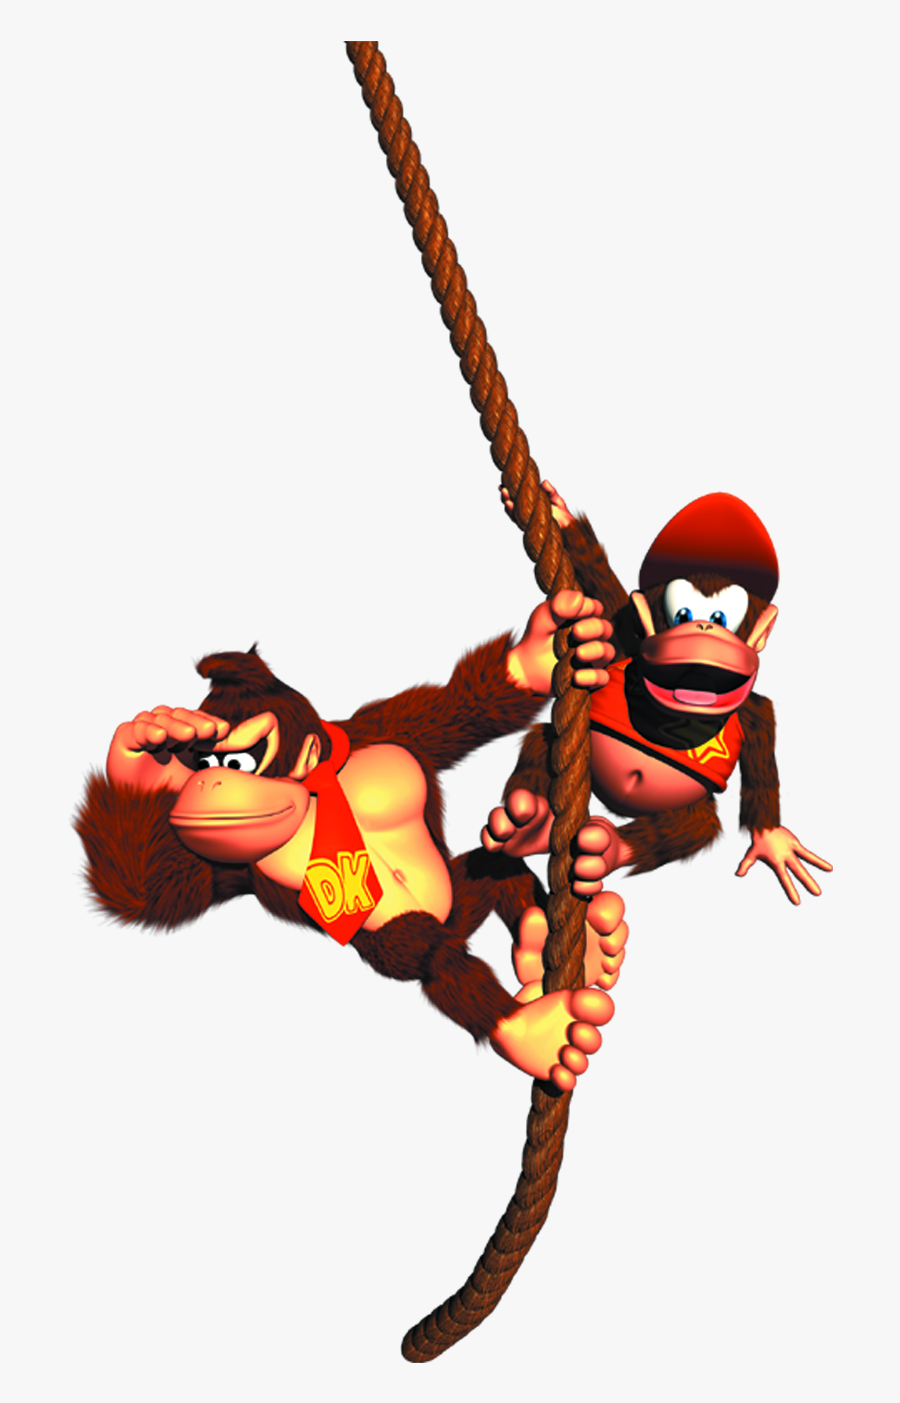 Donkey Kong Png Clipart - Donkey Kong On Vine, Transparent Clipart